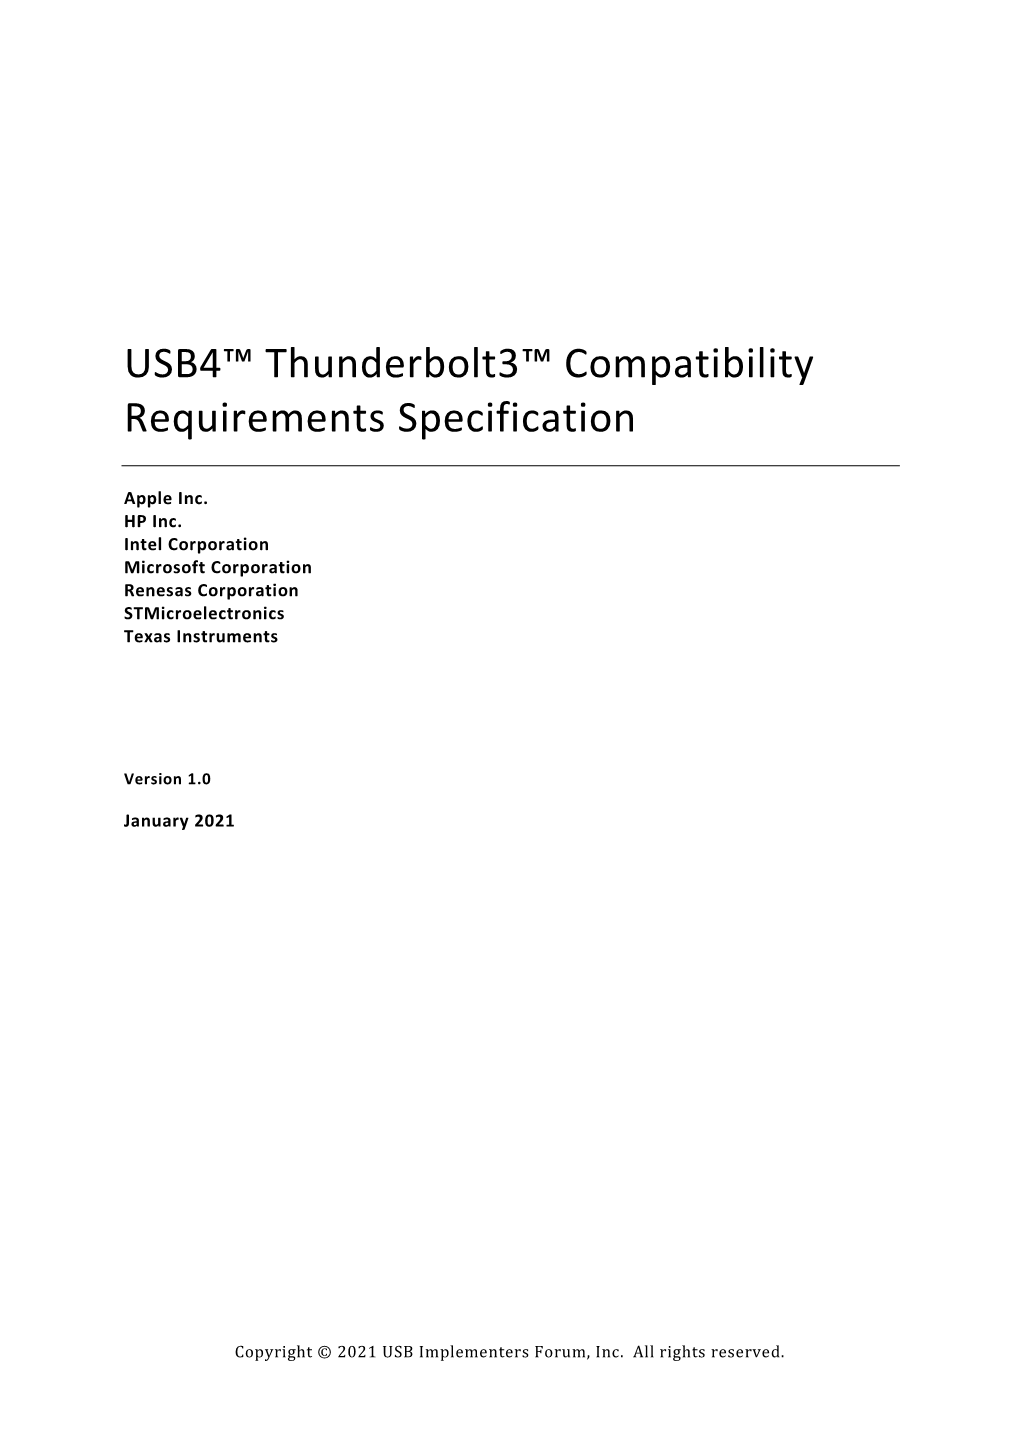 USB4™ Thunderbolt3™ Compatibility Requirements Specification